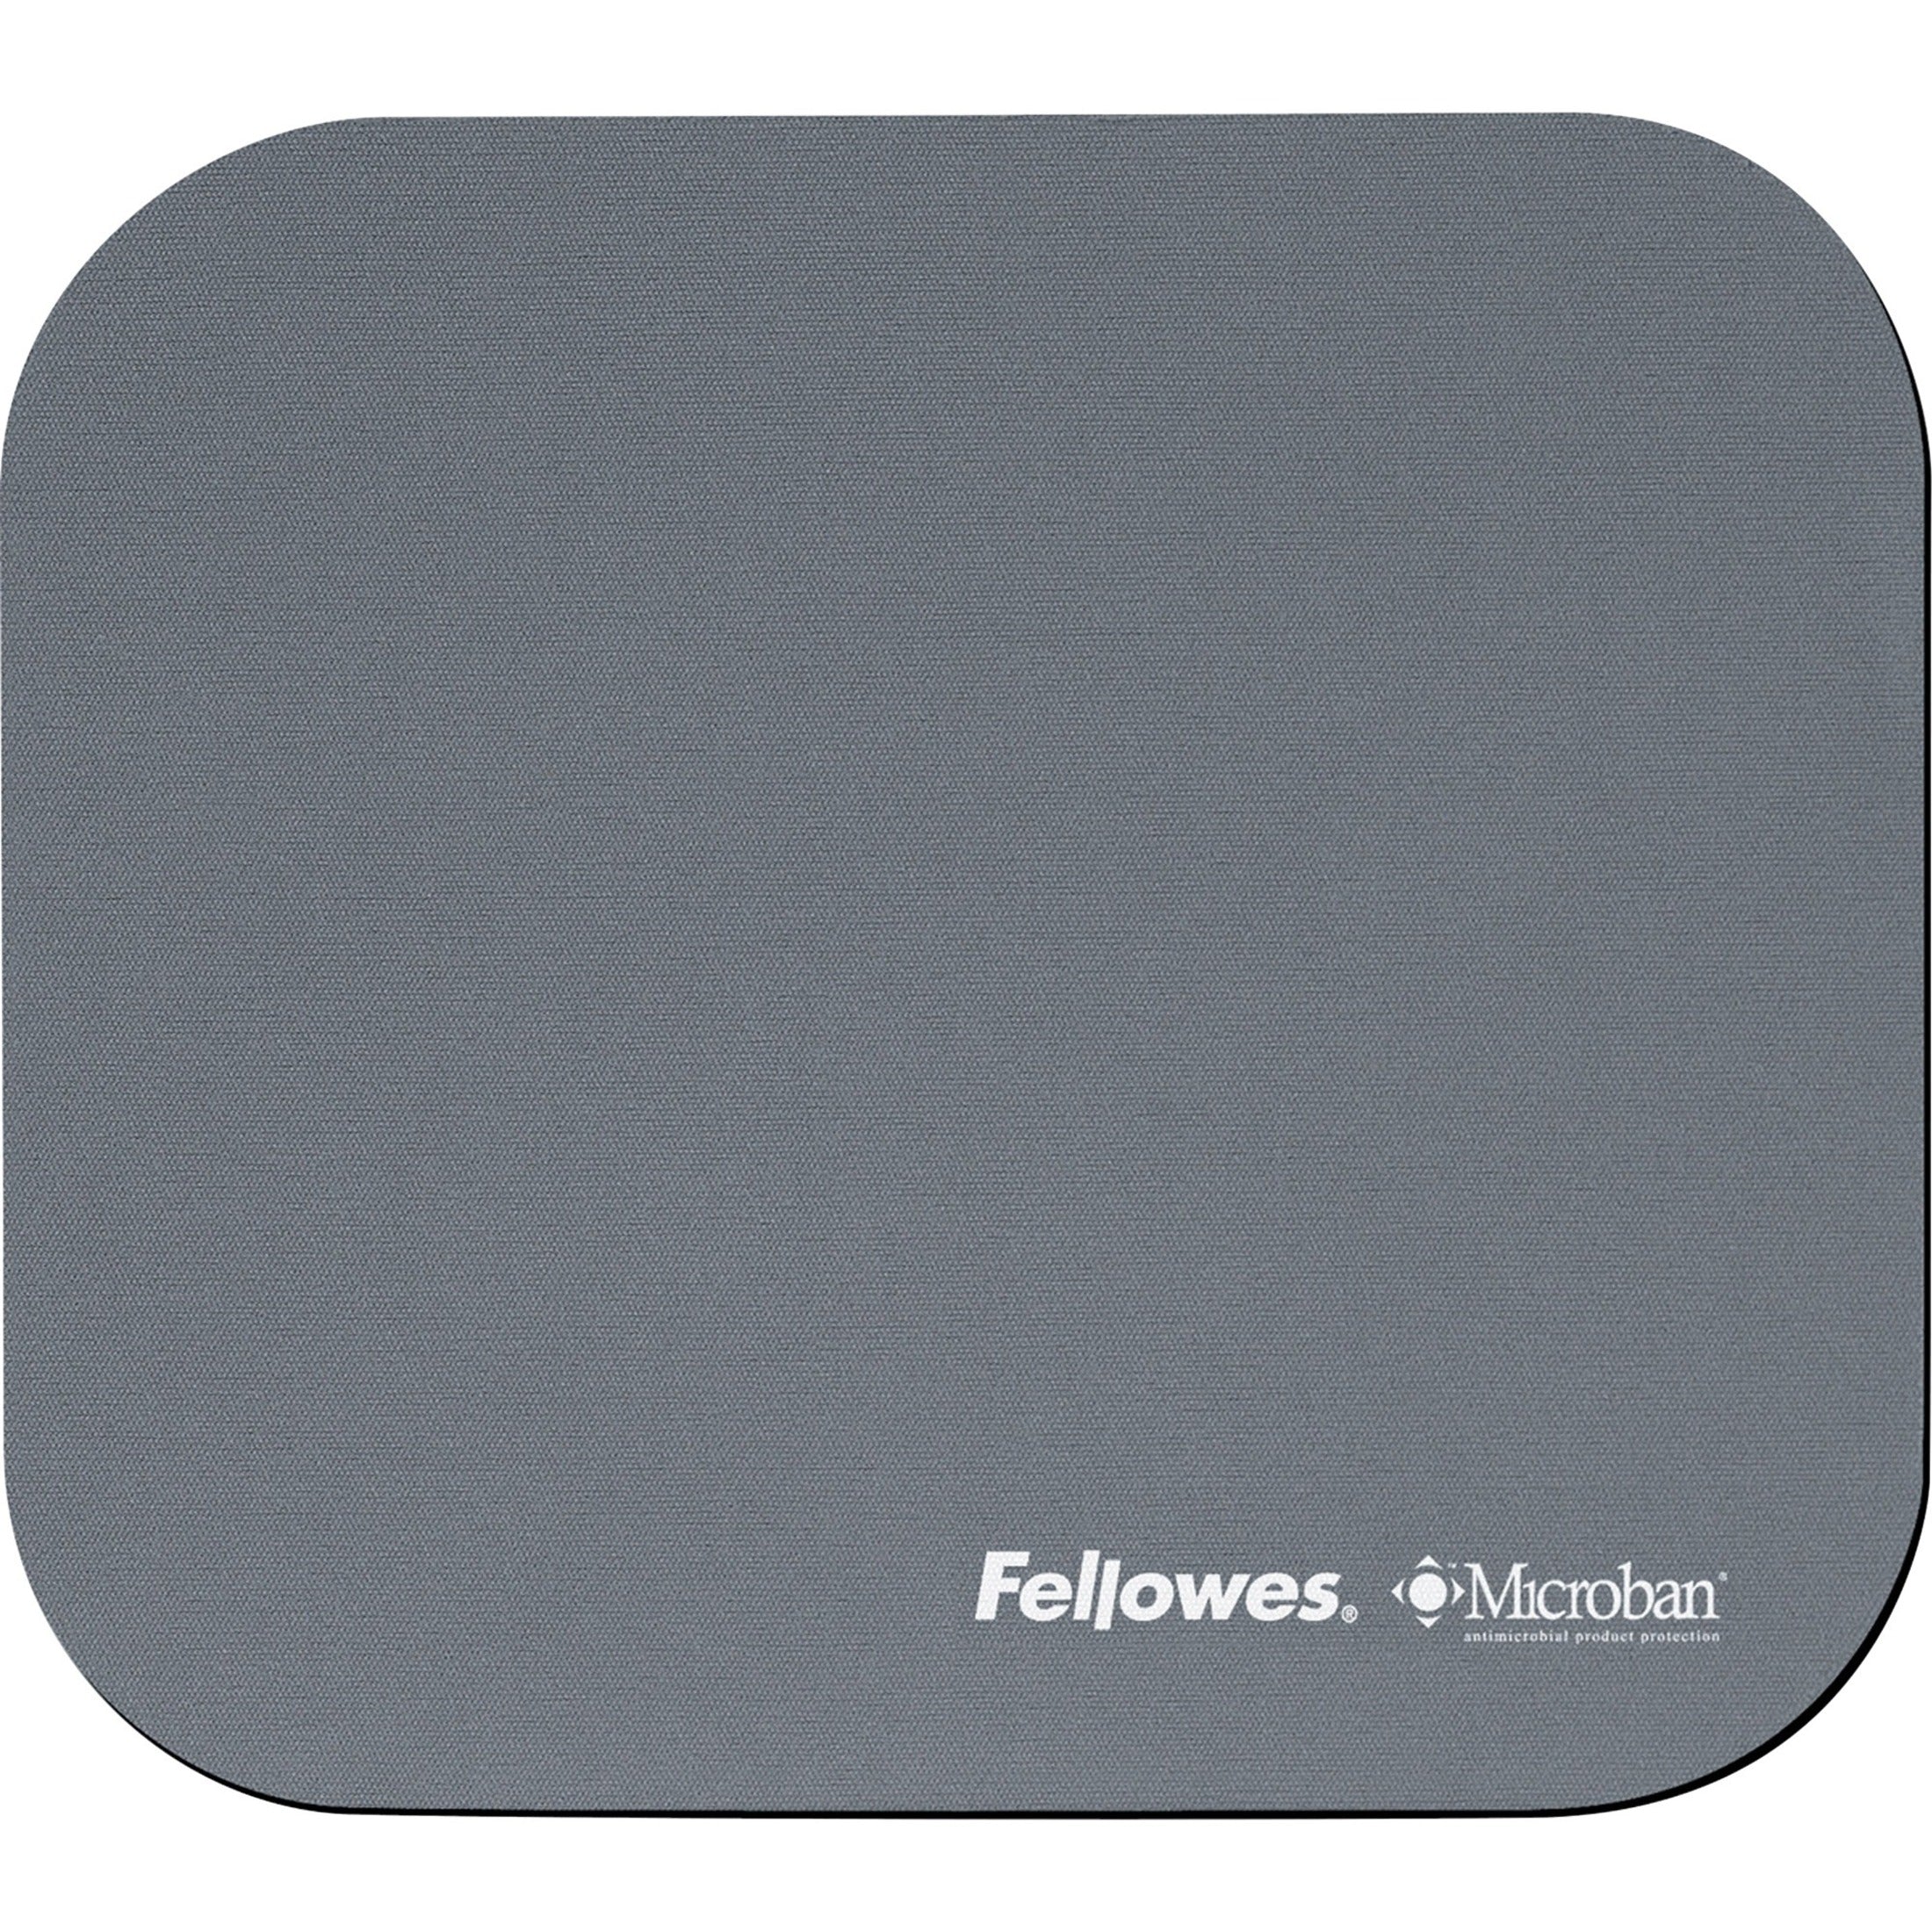 Fellowes 5934001 Microban Mouse Pad, Antimicrobial, Graphite